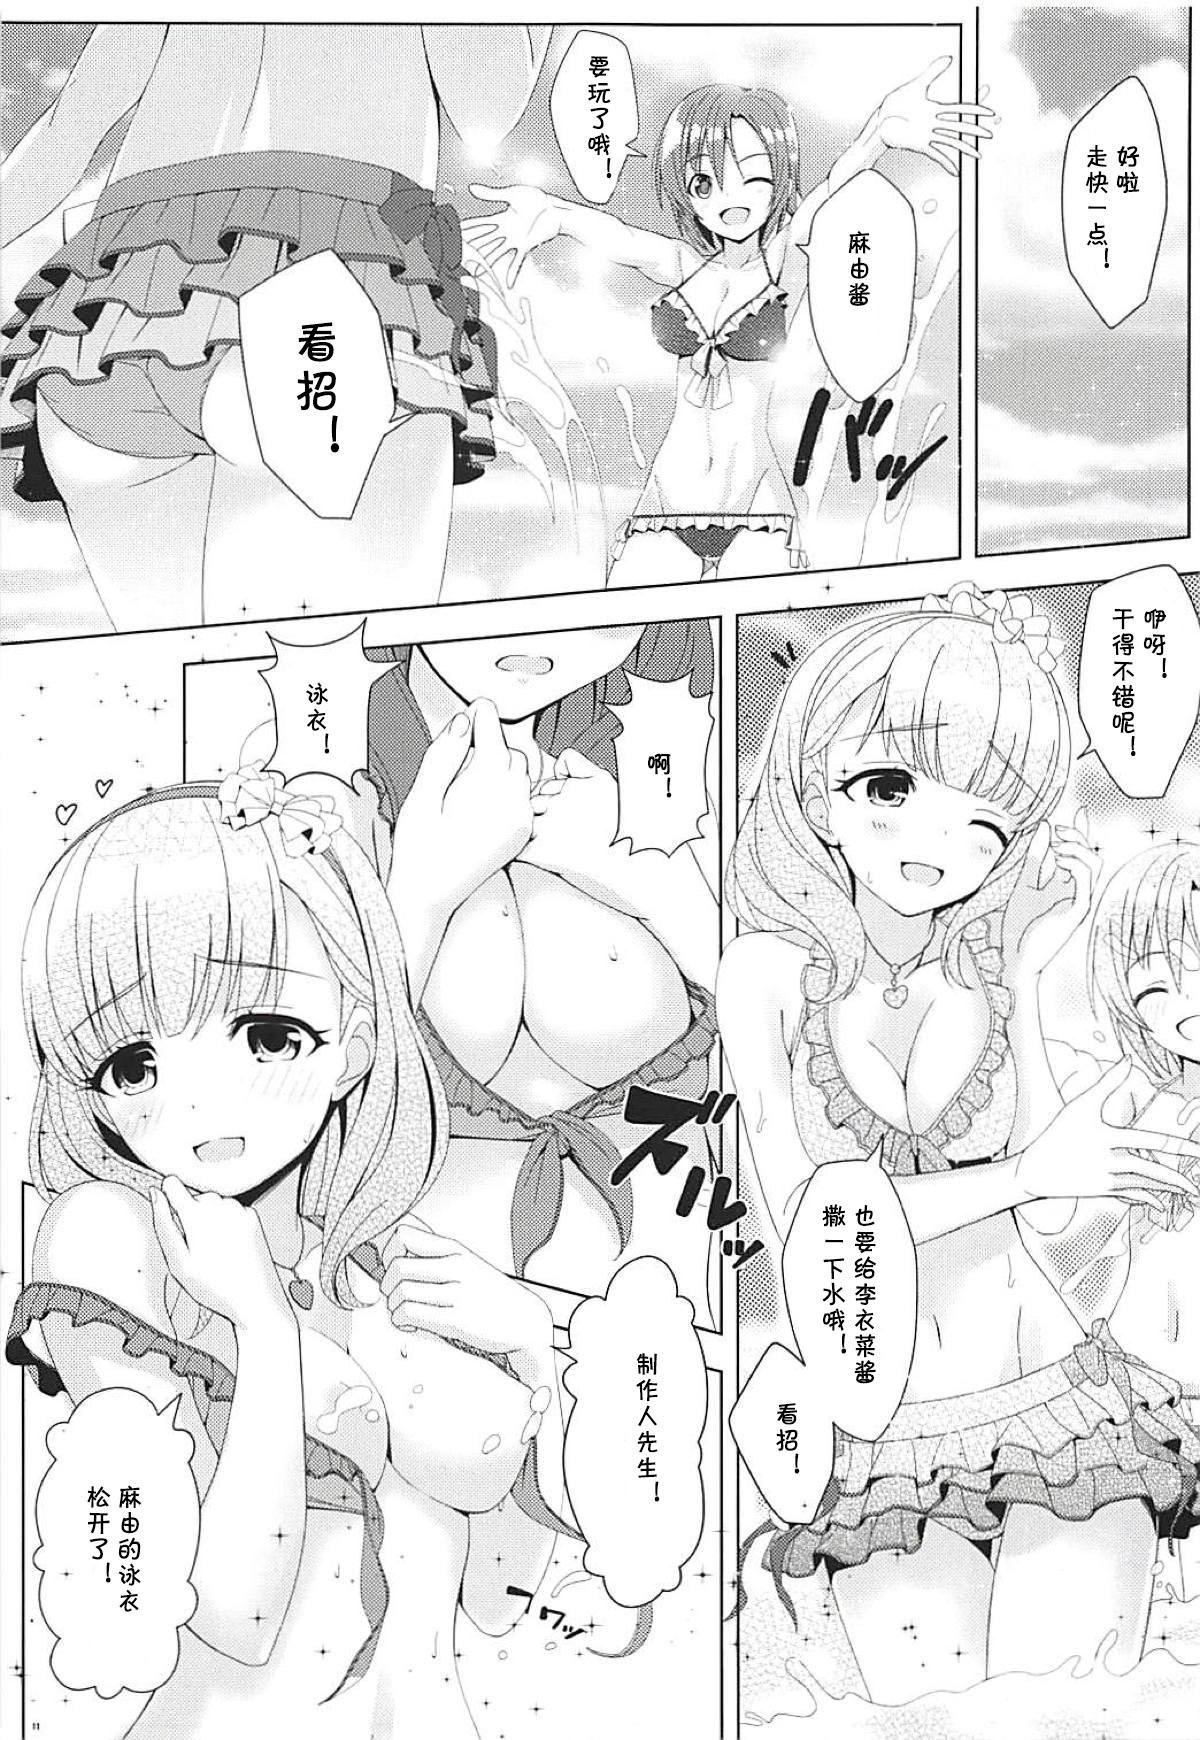 Lick BAD COMMUNICATION? vol. 23 - The idolmaster Ex Girlfriends - Page 11